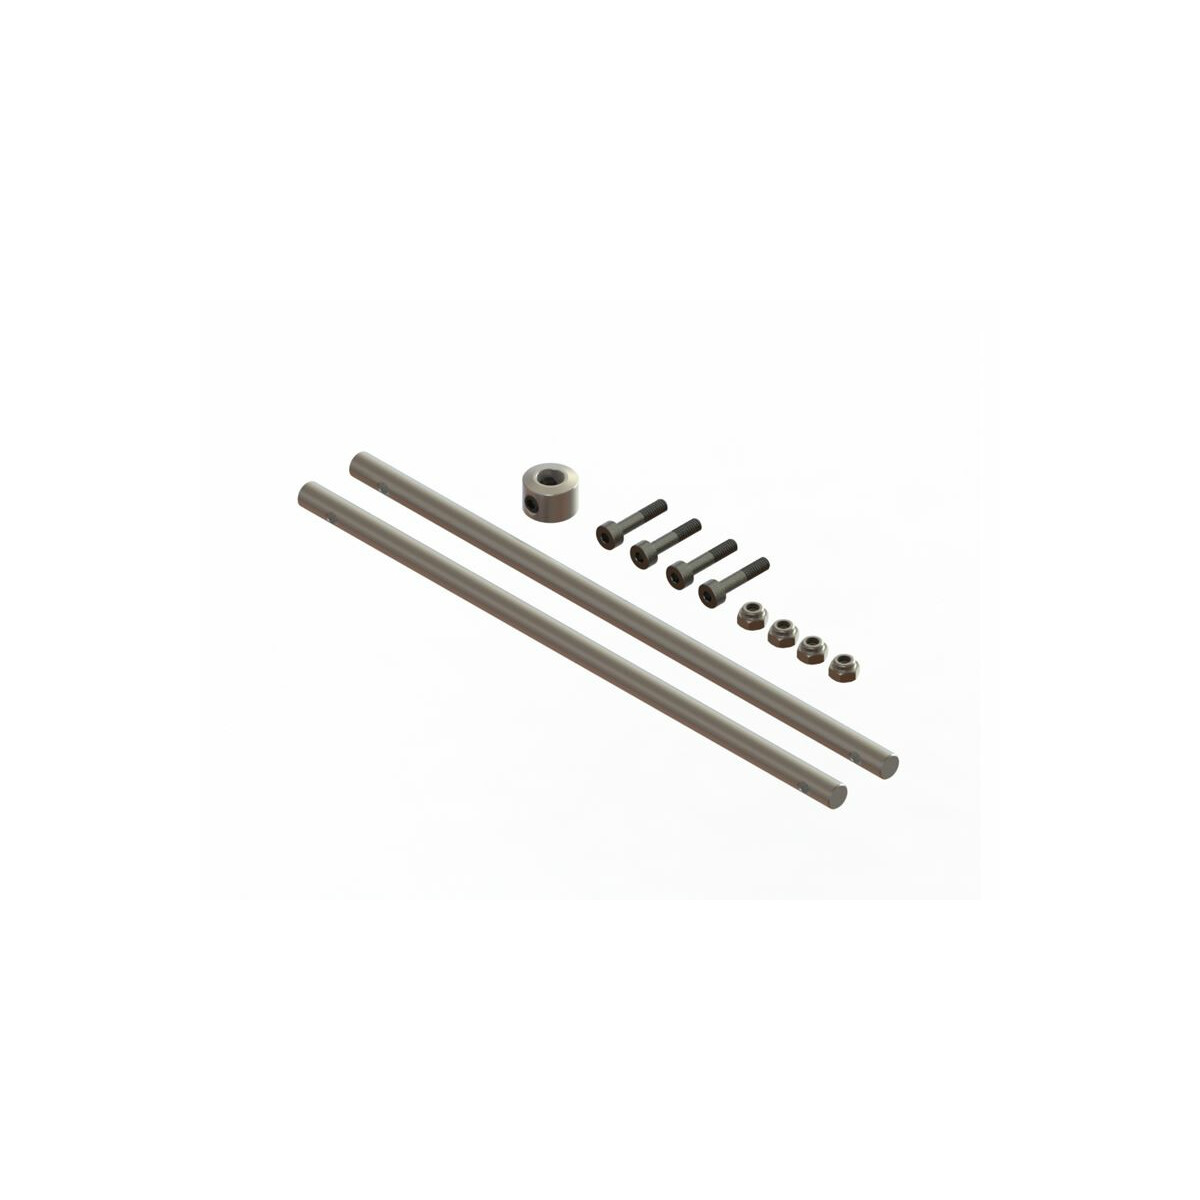 OXY3 - Carbon Steel Main Shaft, 2PC